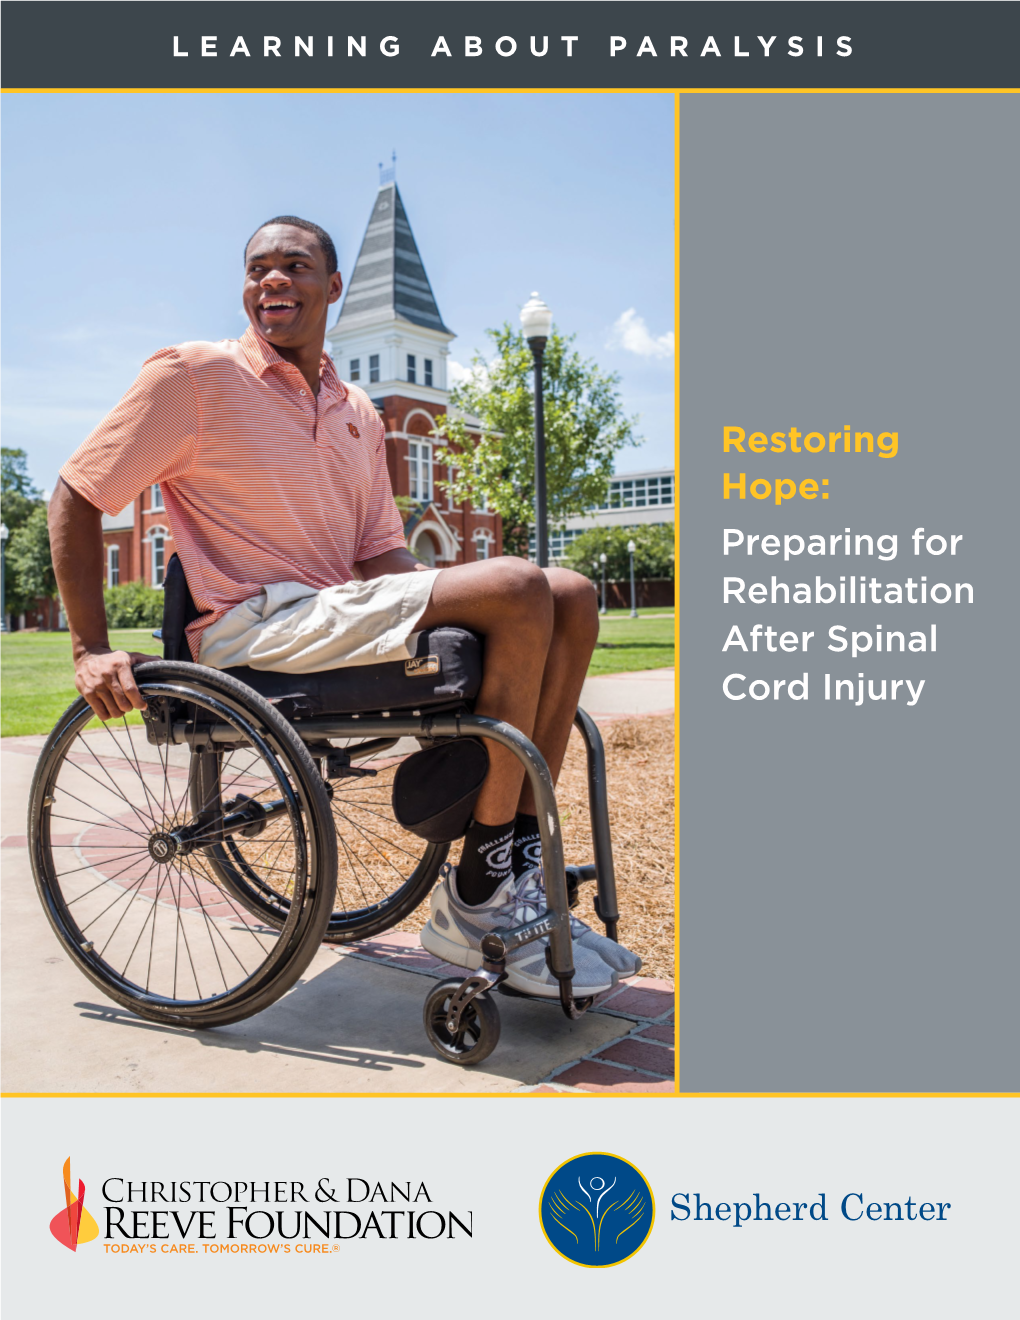 Restoring Hope: Preparing for Rehabilitation After Spinal Cord Injury